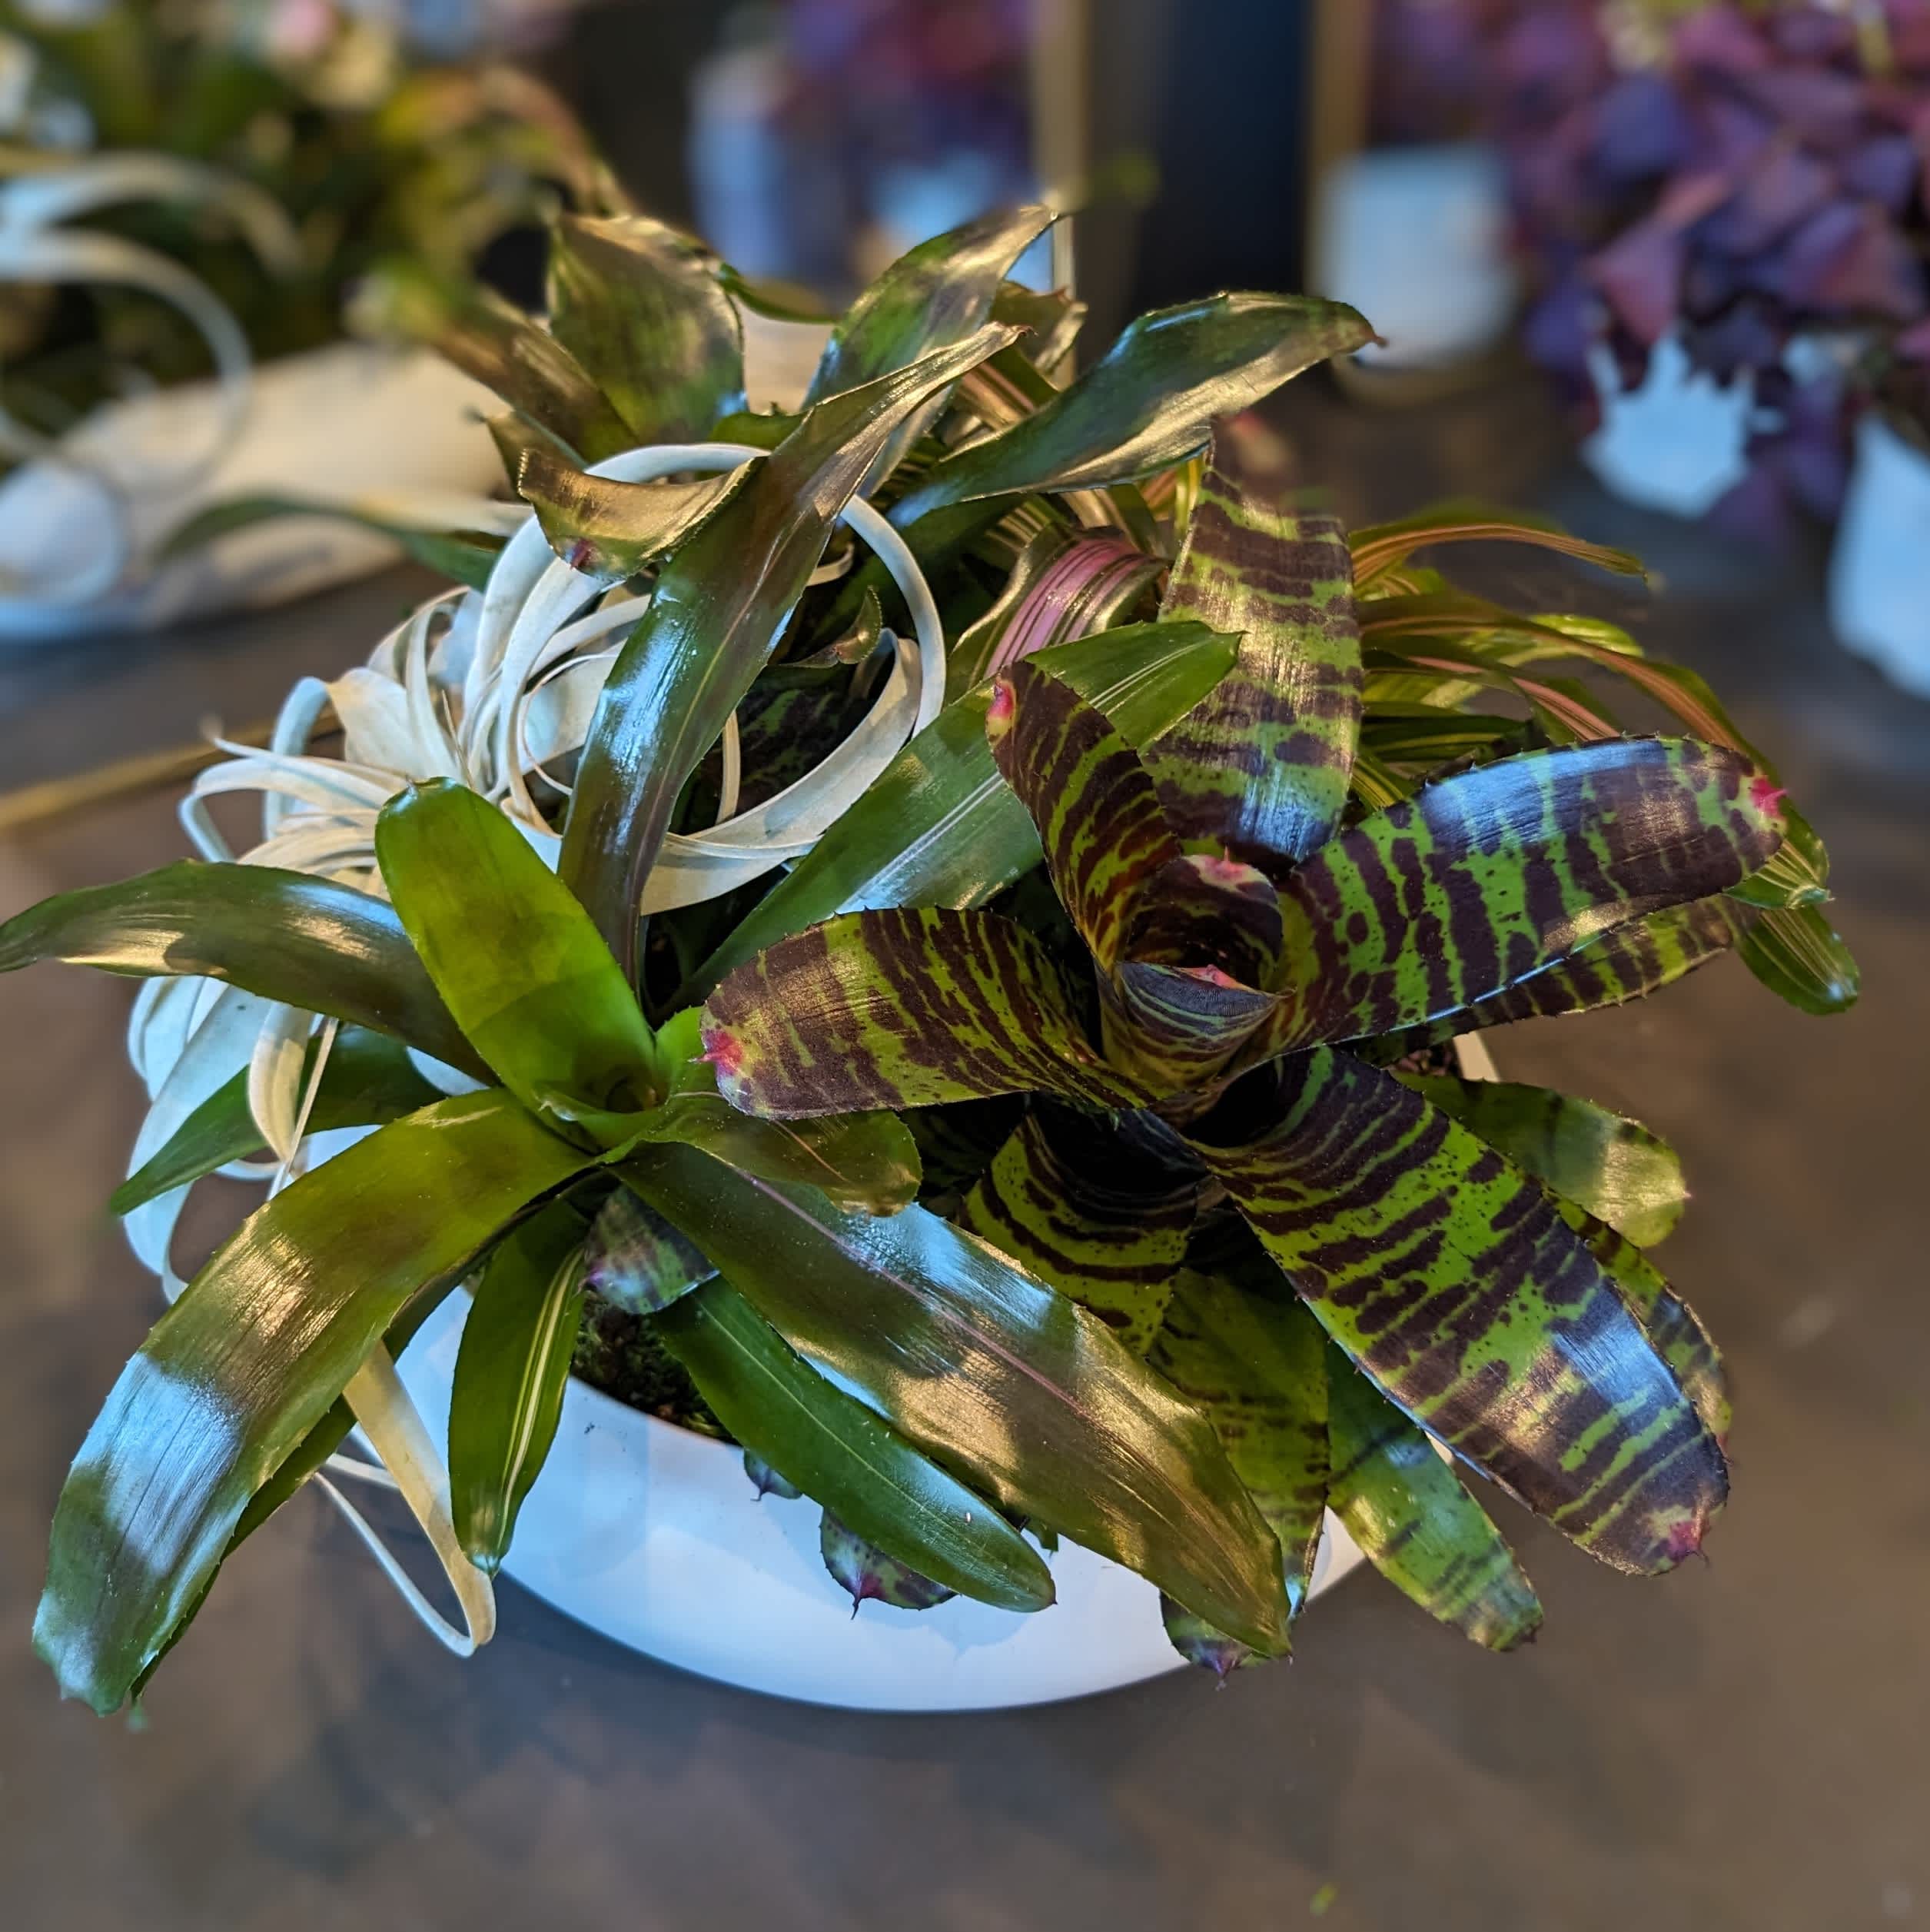  Bromeliad Centerpiece lasts months - Gorgeous bromeliad mix is chic for any round table. 